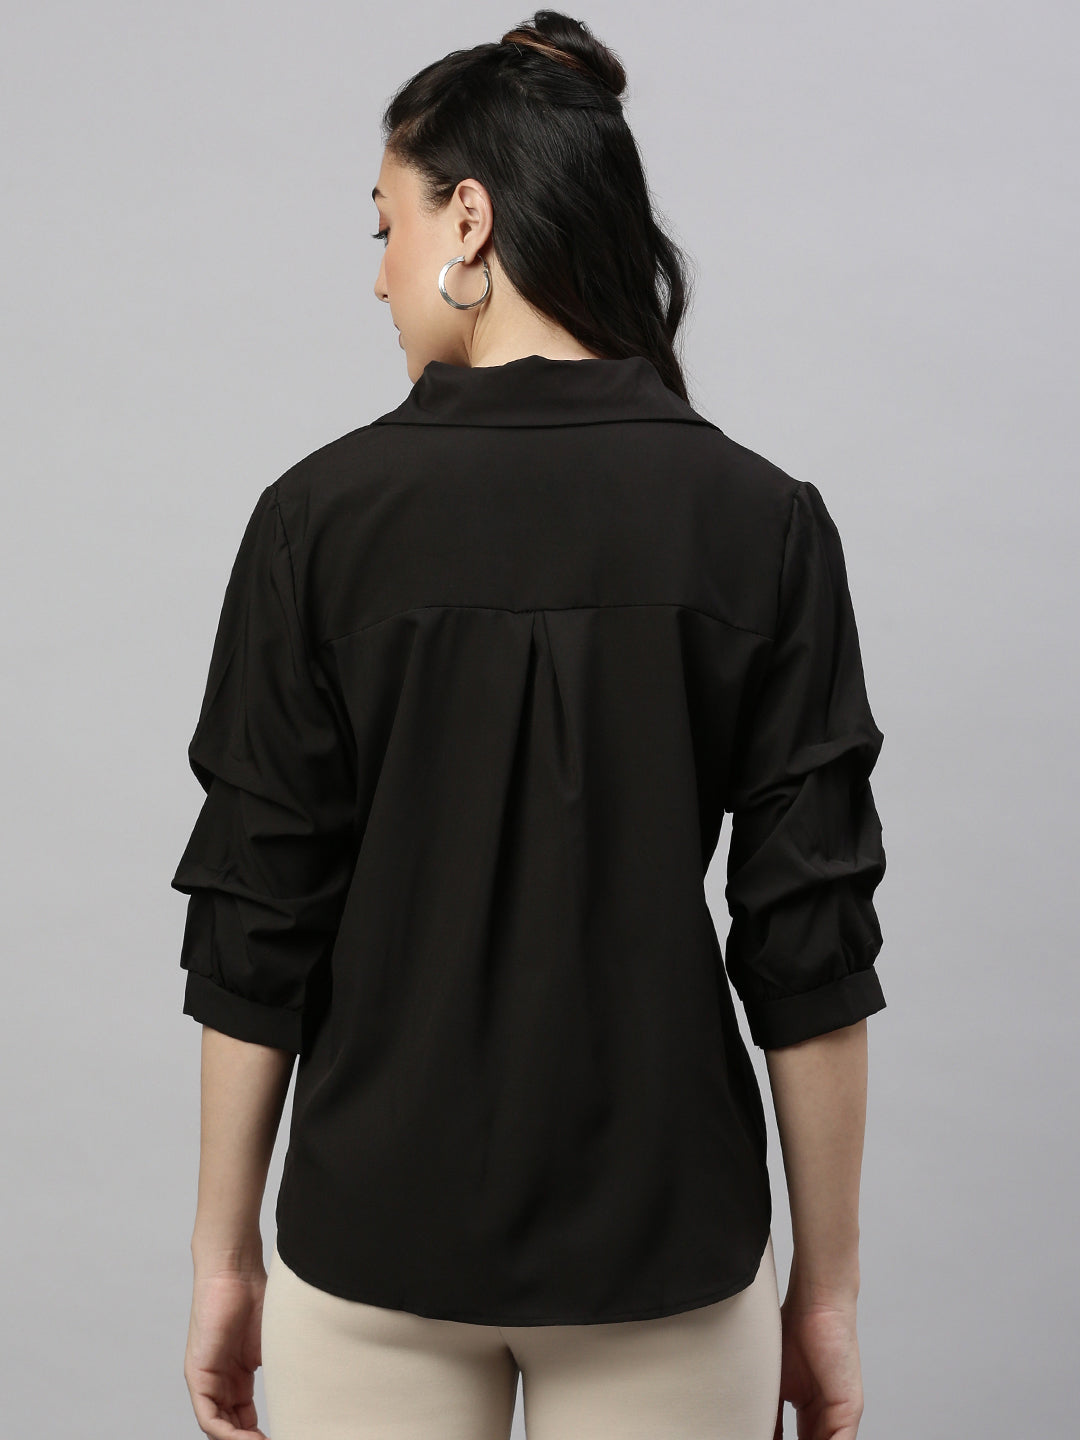 Women Solid Black Cinched Waist Smocked Top